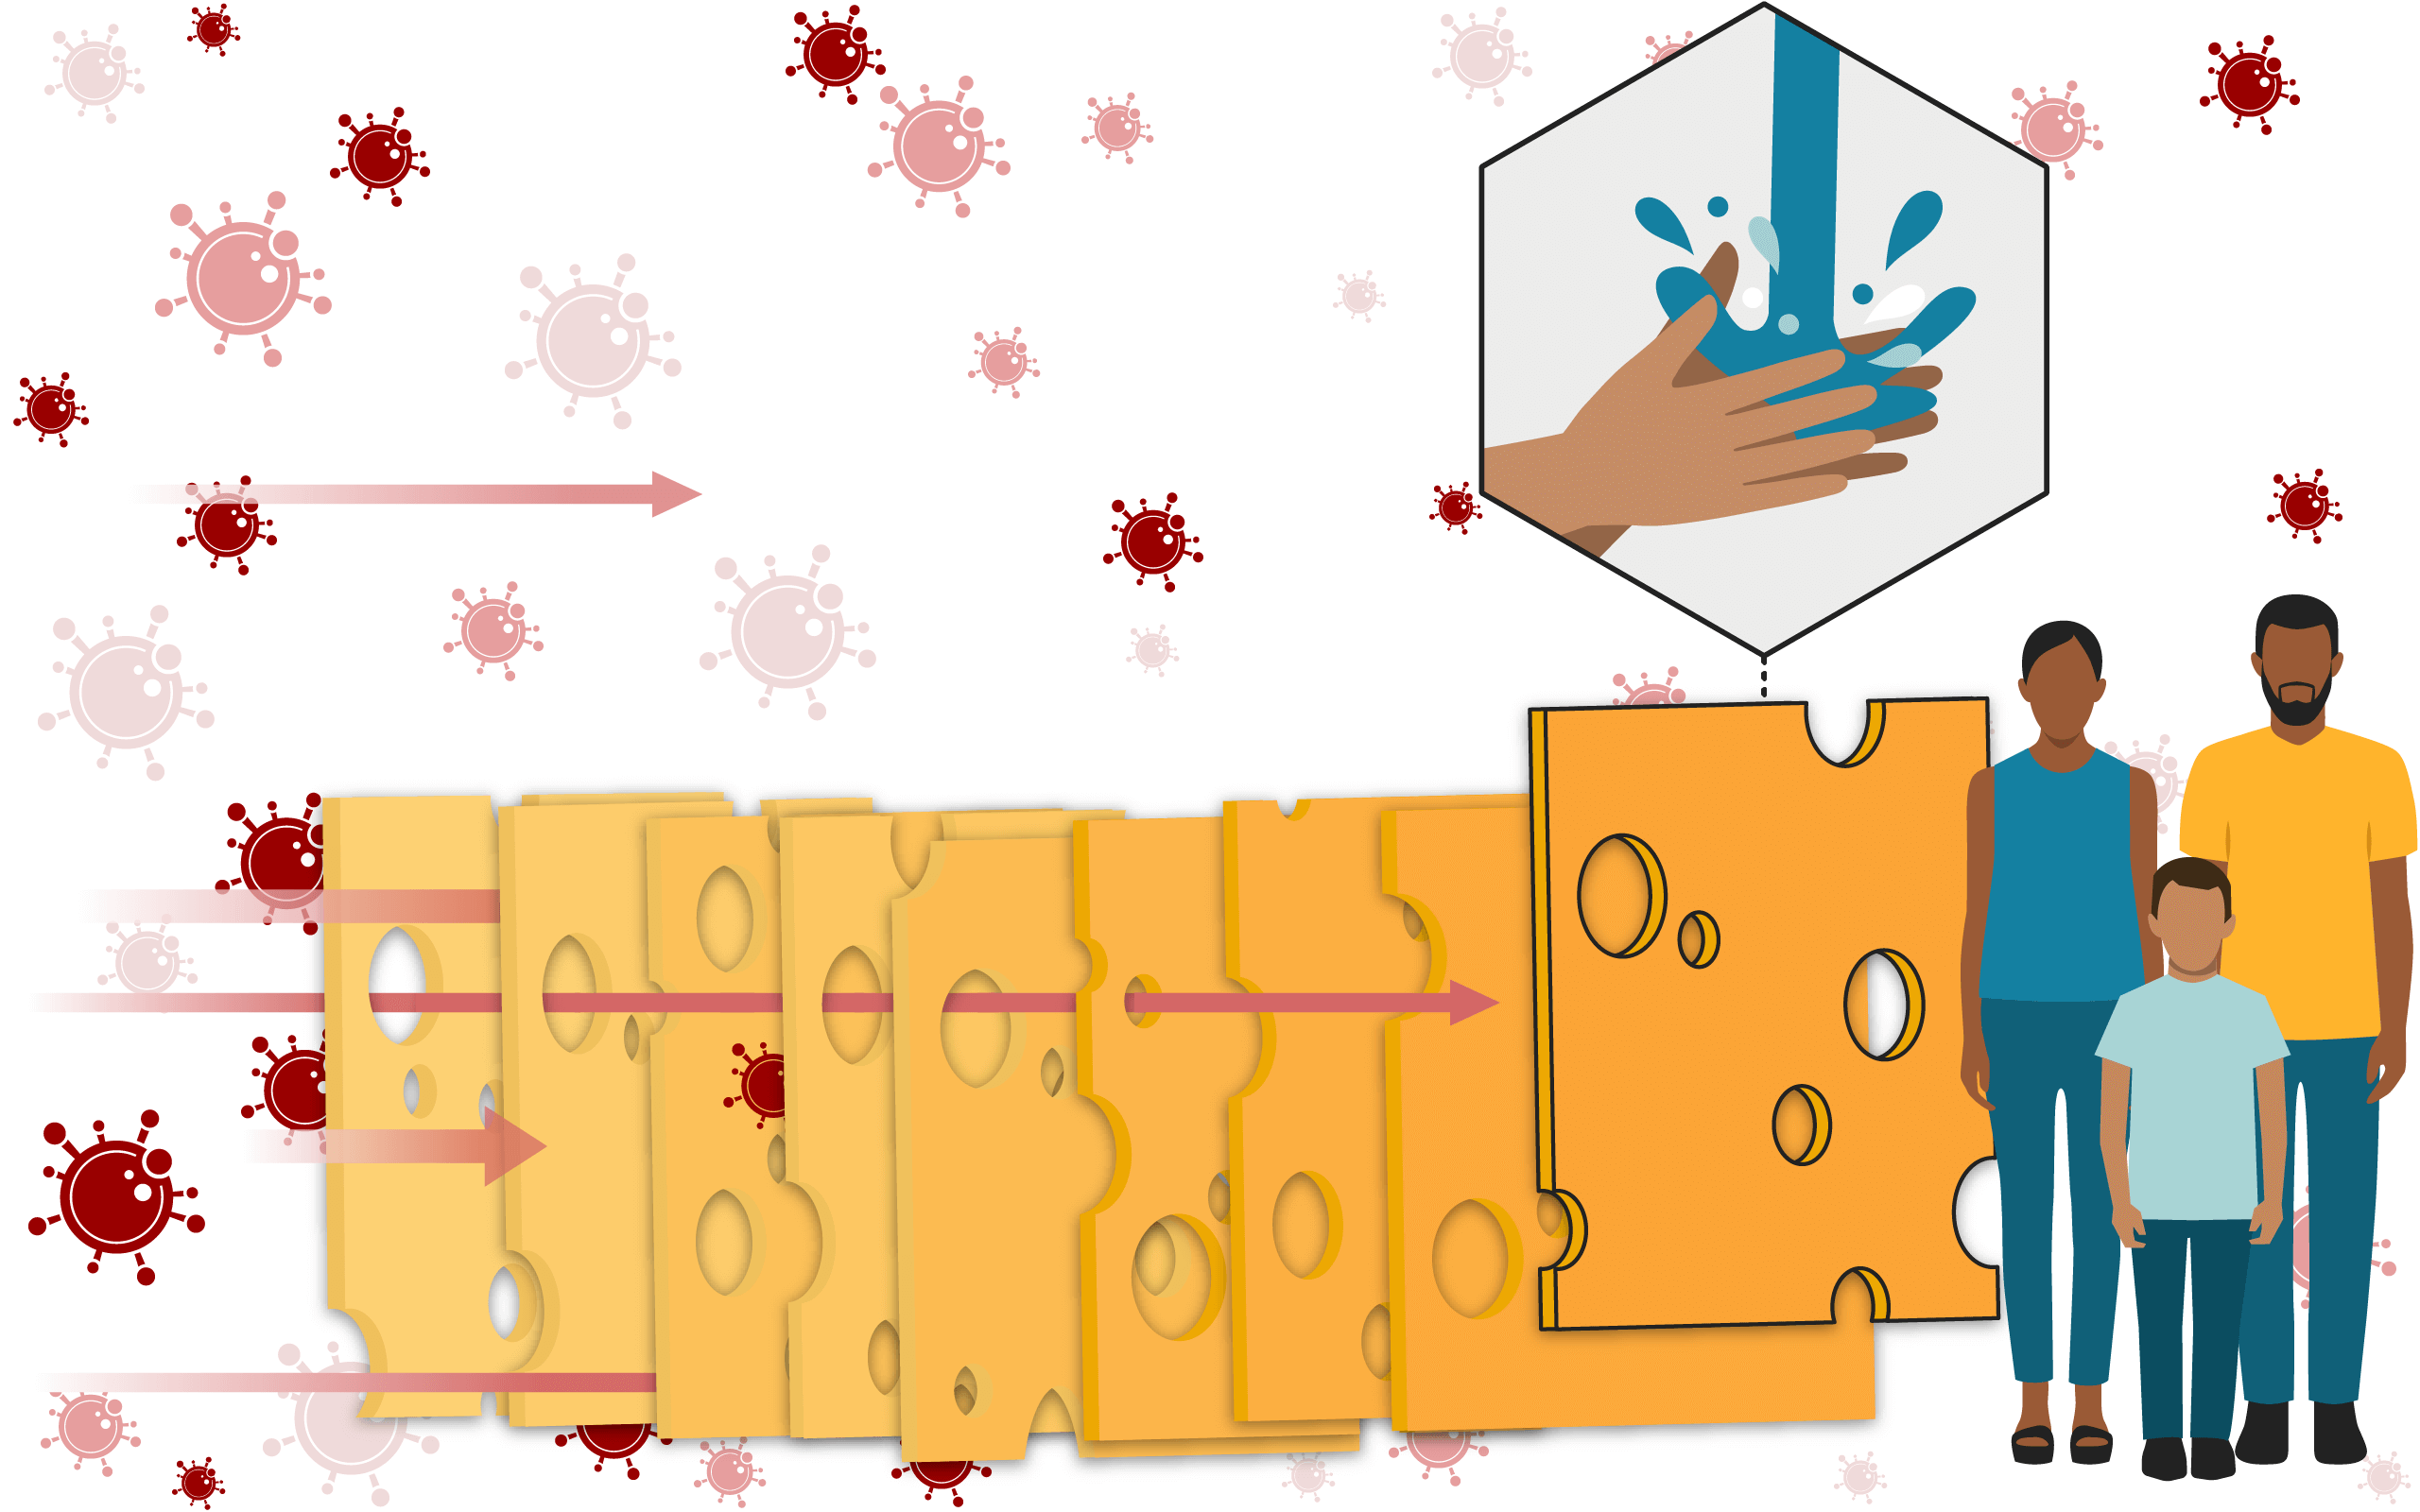 Illustration of a Swiss cheese, with a slice highlighted, representing good hygiene